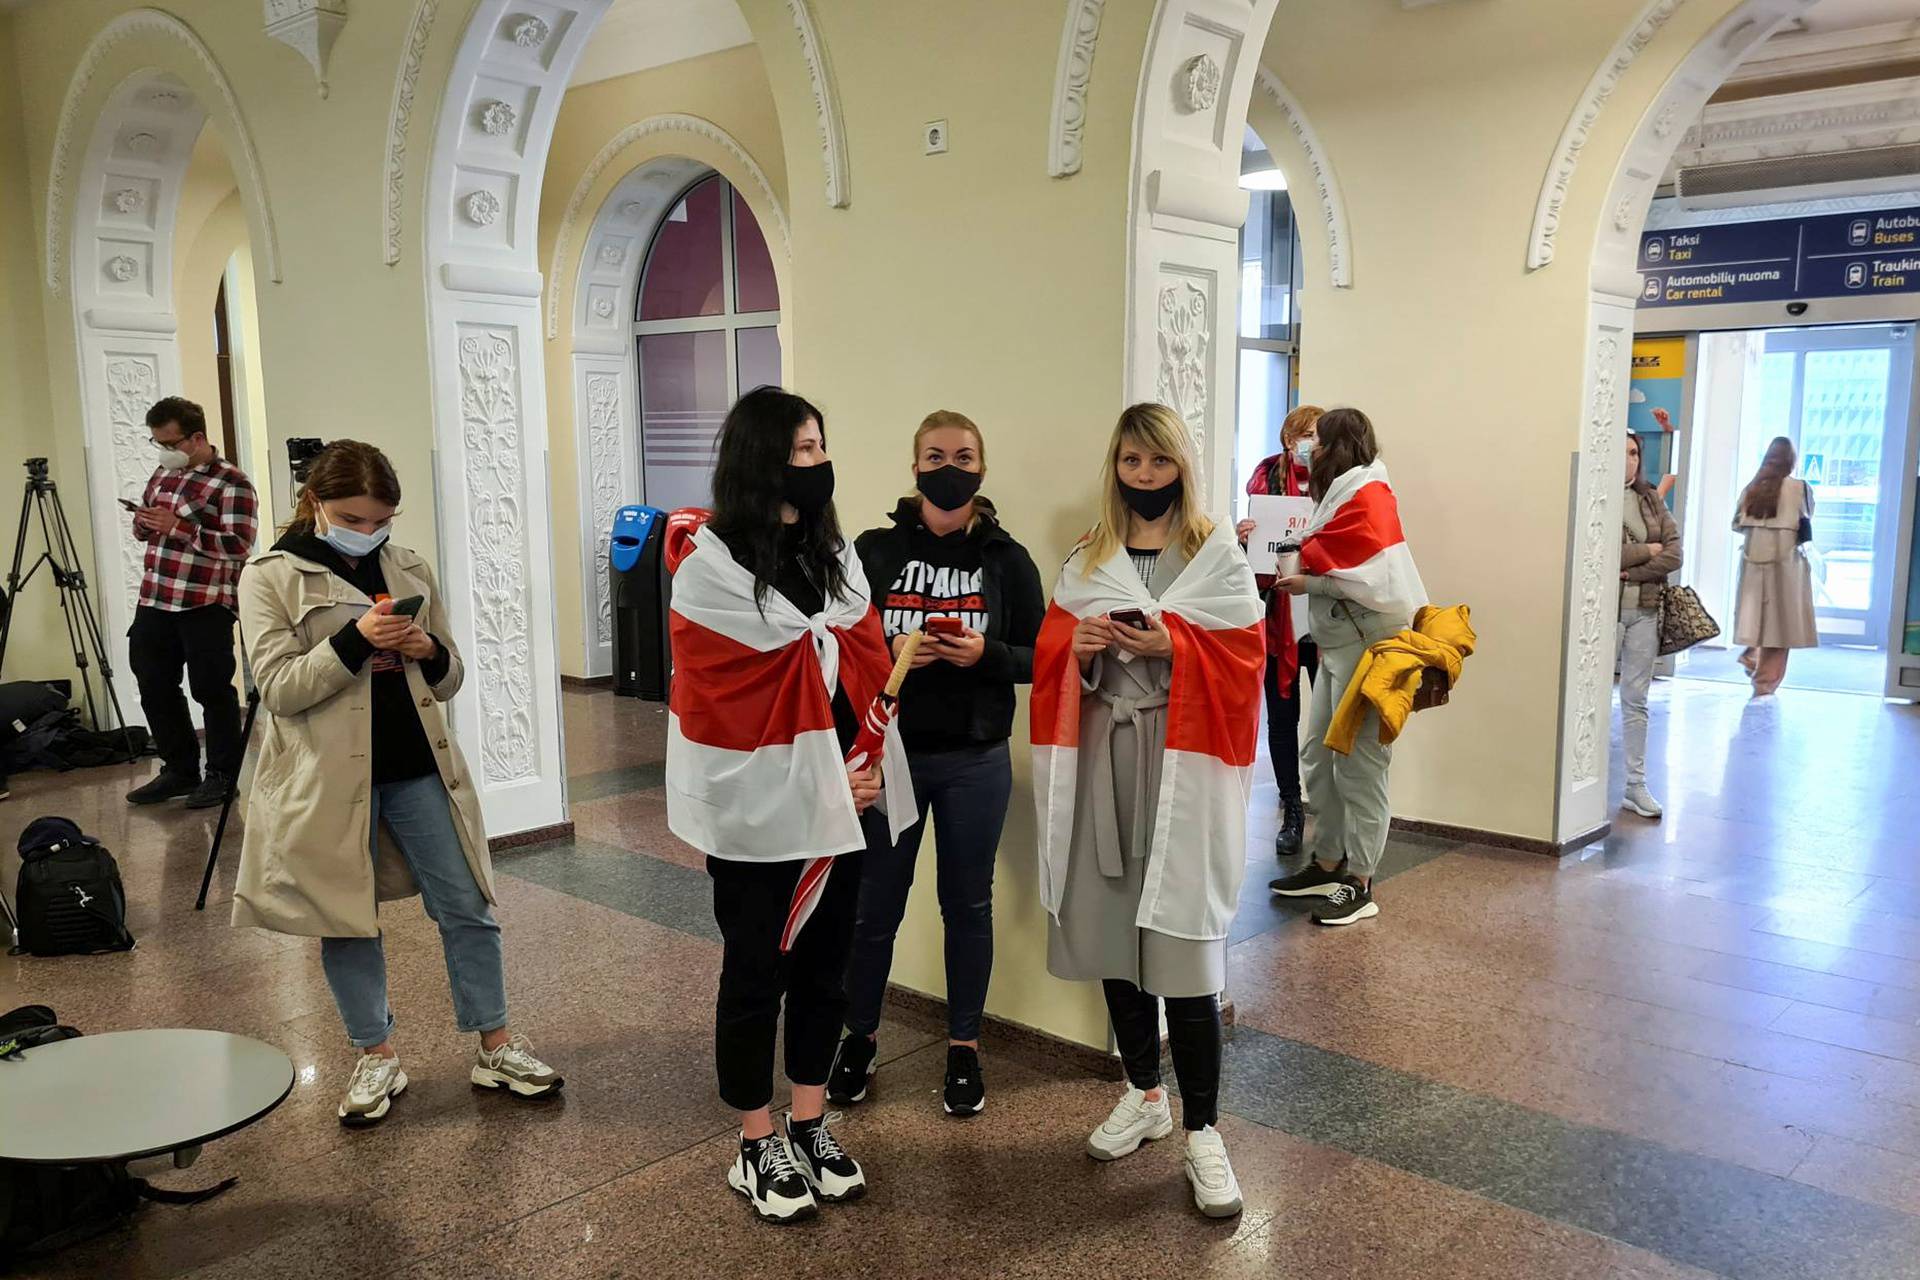 Supporters of Belarusian opposition blogger and activist Roman Protasevich wait at Vilnius Airport in Vilnius